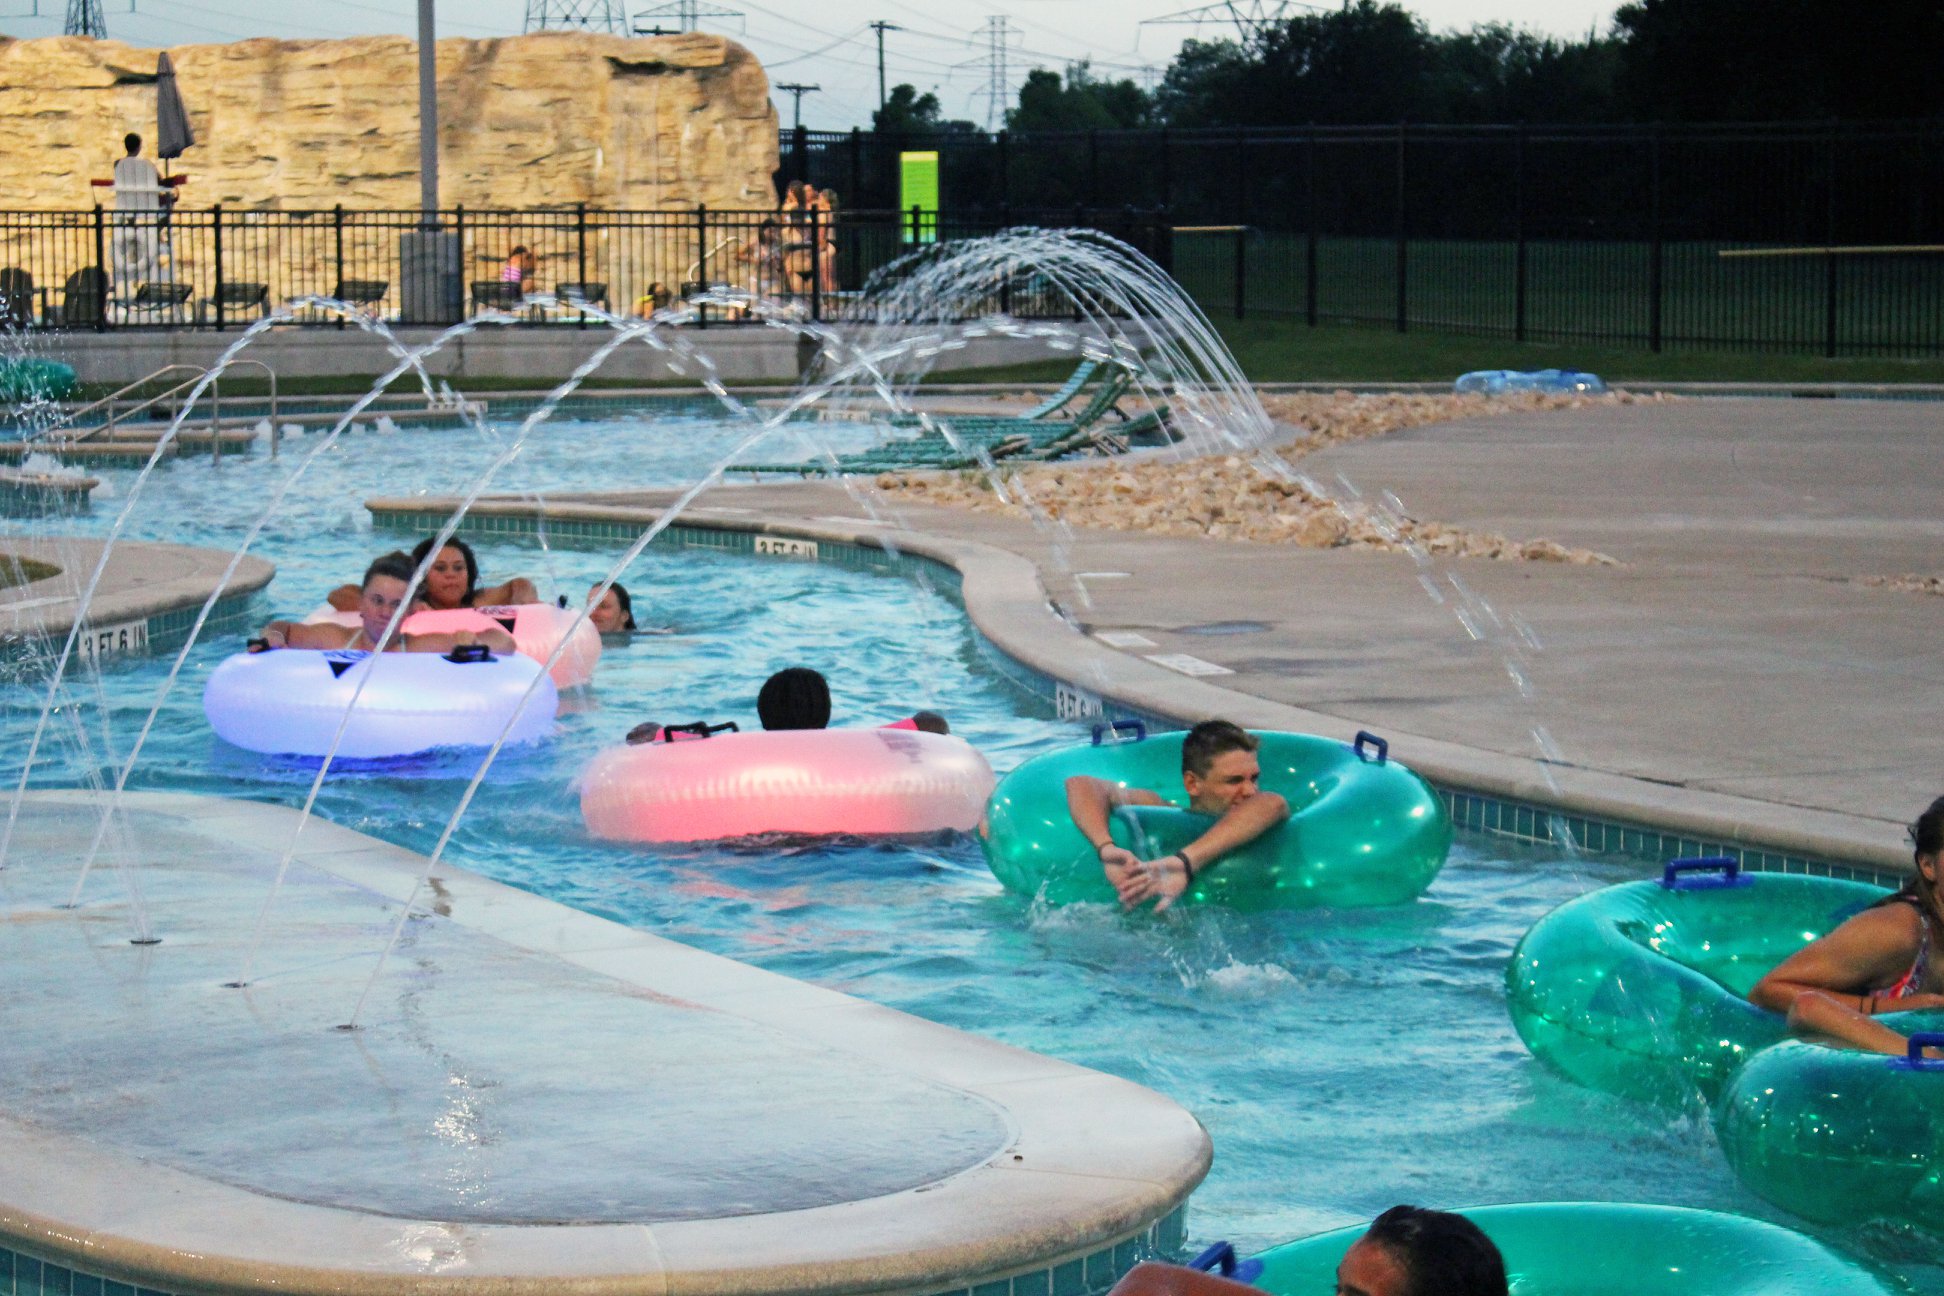 Jack Carter Pool lazy river in Plano